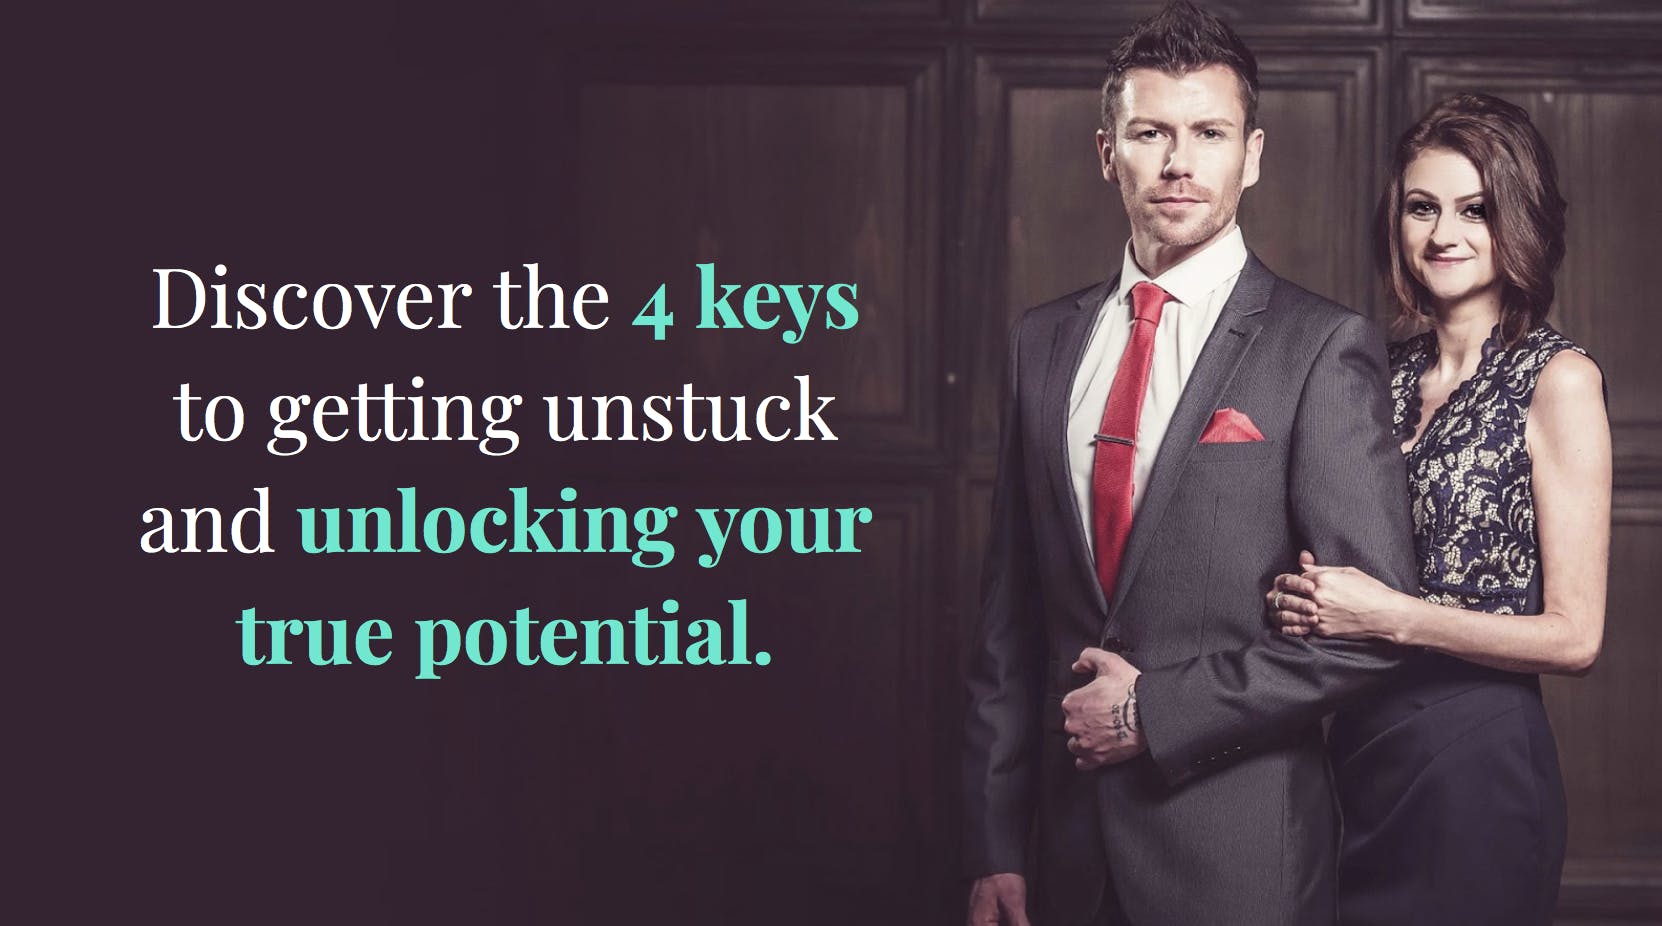 The 4 Keys To Getting Unstuck & Unlocking Your True Potential